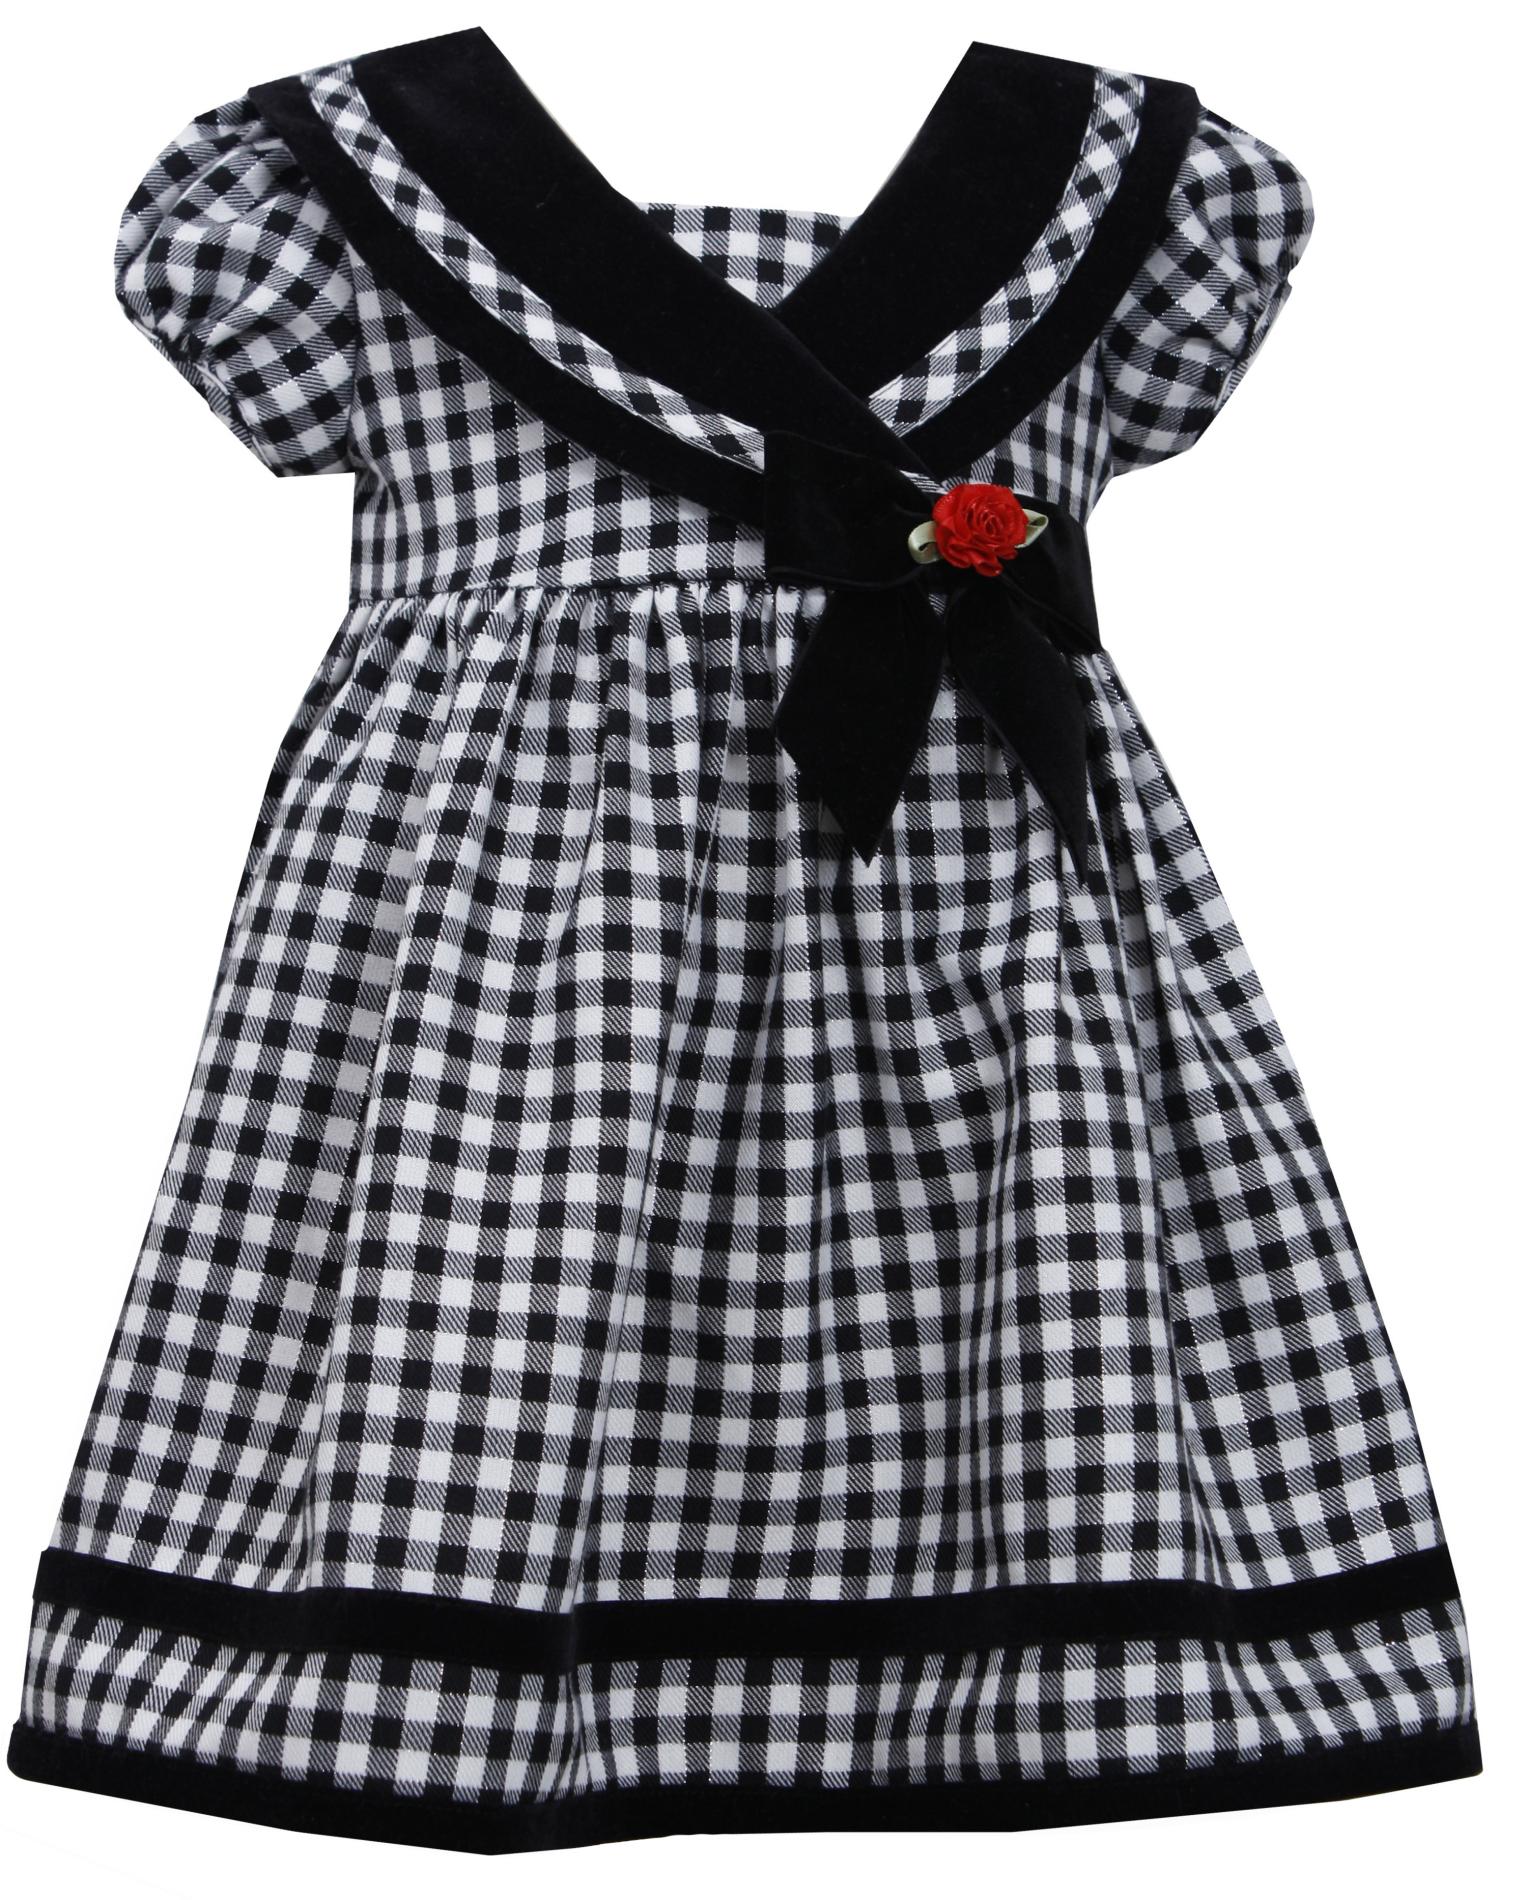 Ashley Ann Infant & Toddler Girl's Knit Party Dress - Checkered